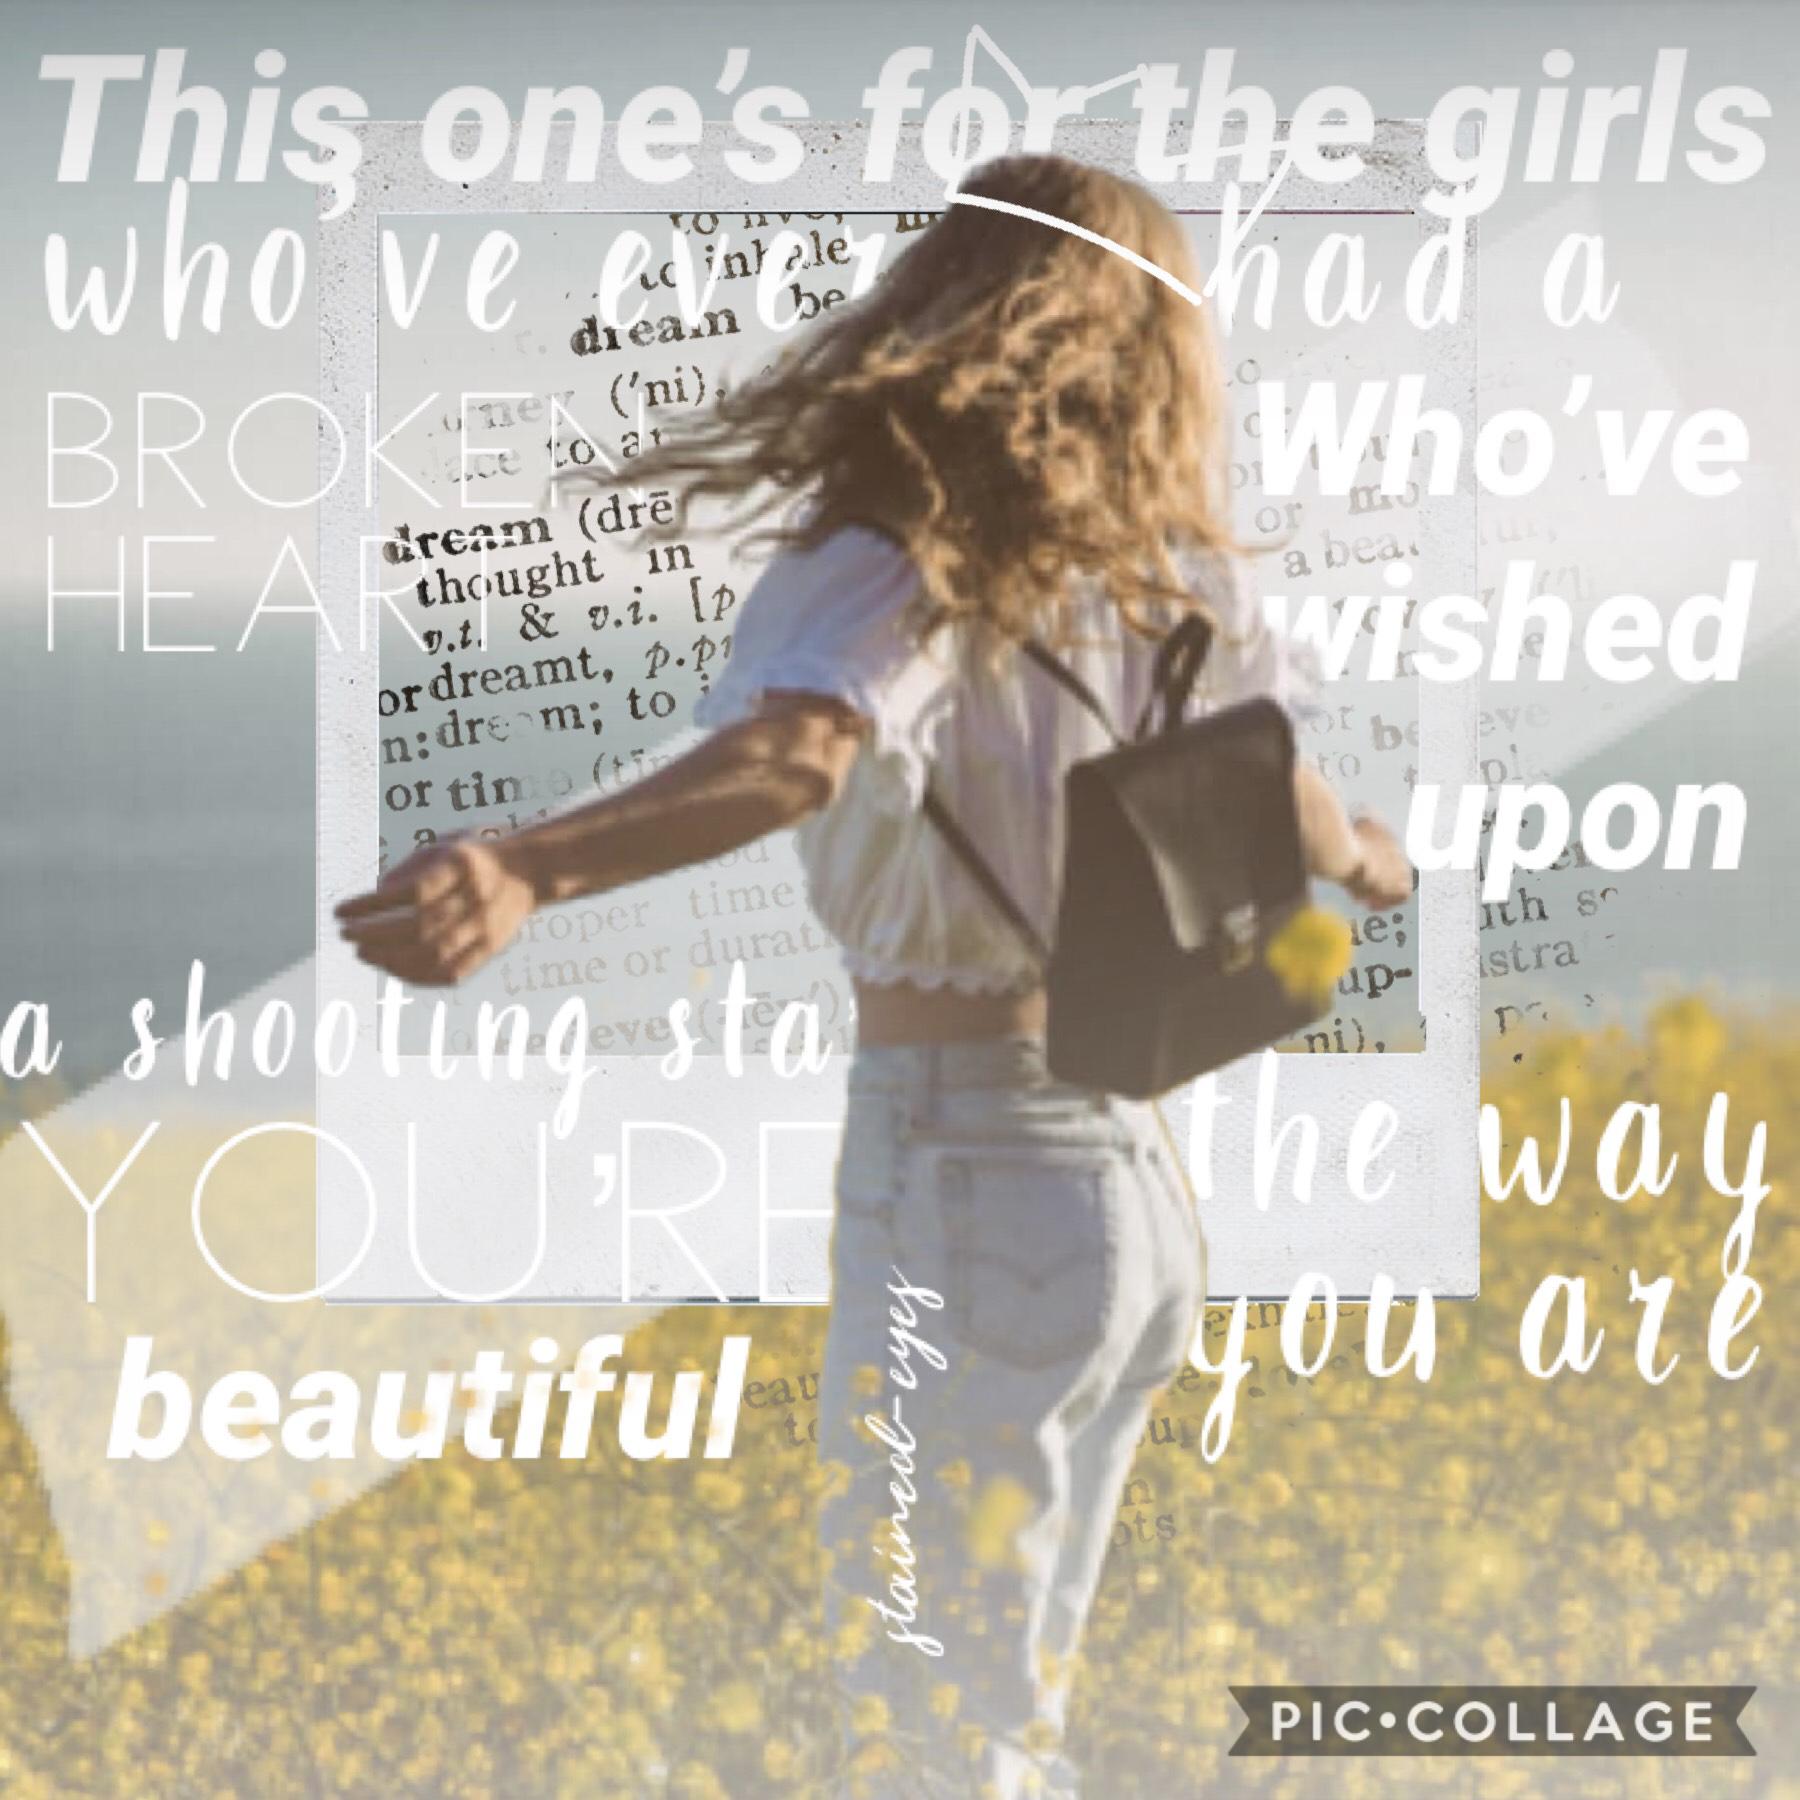 HMU what’s this collage missing? I loved he quote and the pic maybe I’m just rusty or self-judgy but it’s missing /something/ help me out sparks (new name, like it? Lmk)
QOTD: marvel or dc
AOTD: MARVEL YASSSS (see bio duh)